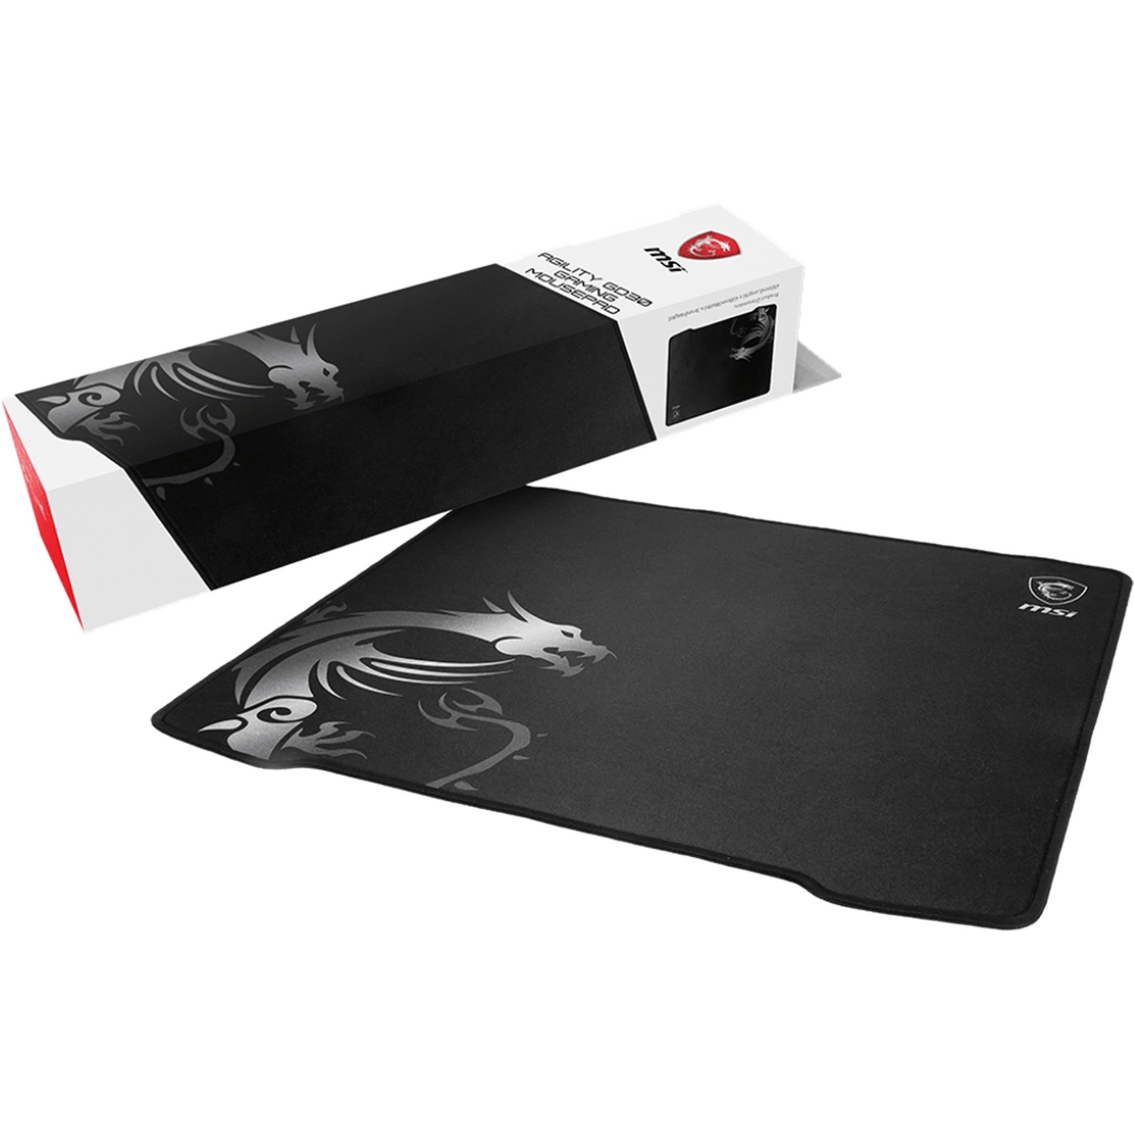 MSI Agility GD30 Gaming Mouse Pad - Image 3 of 4